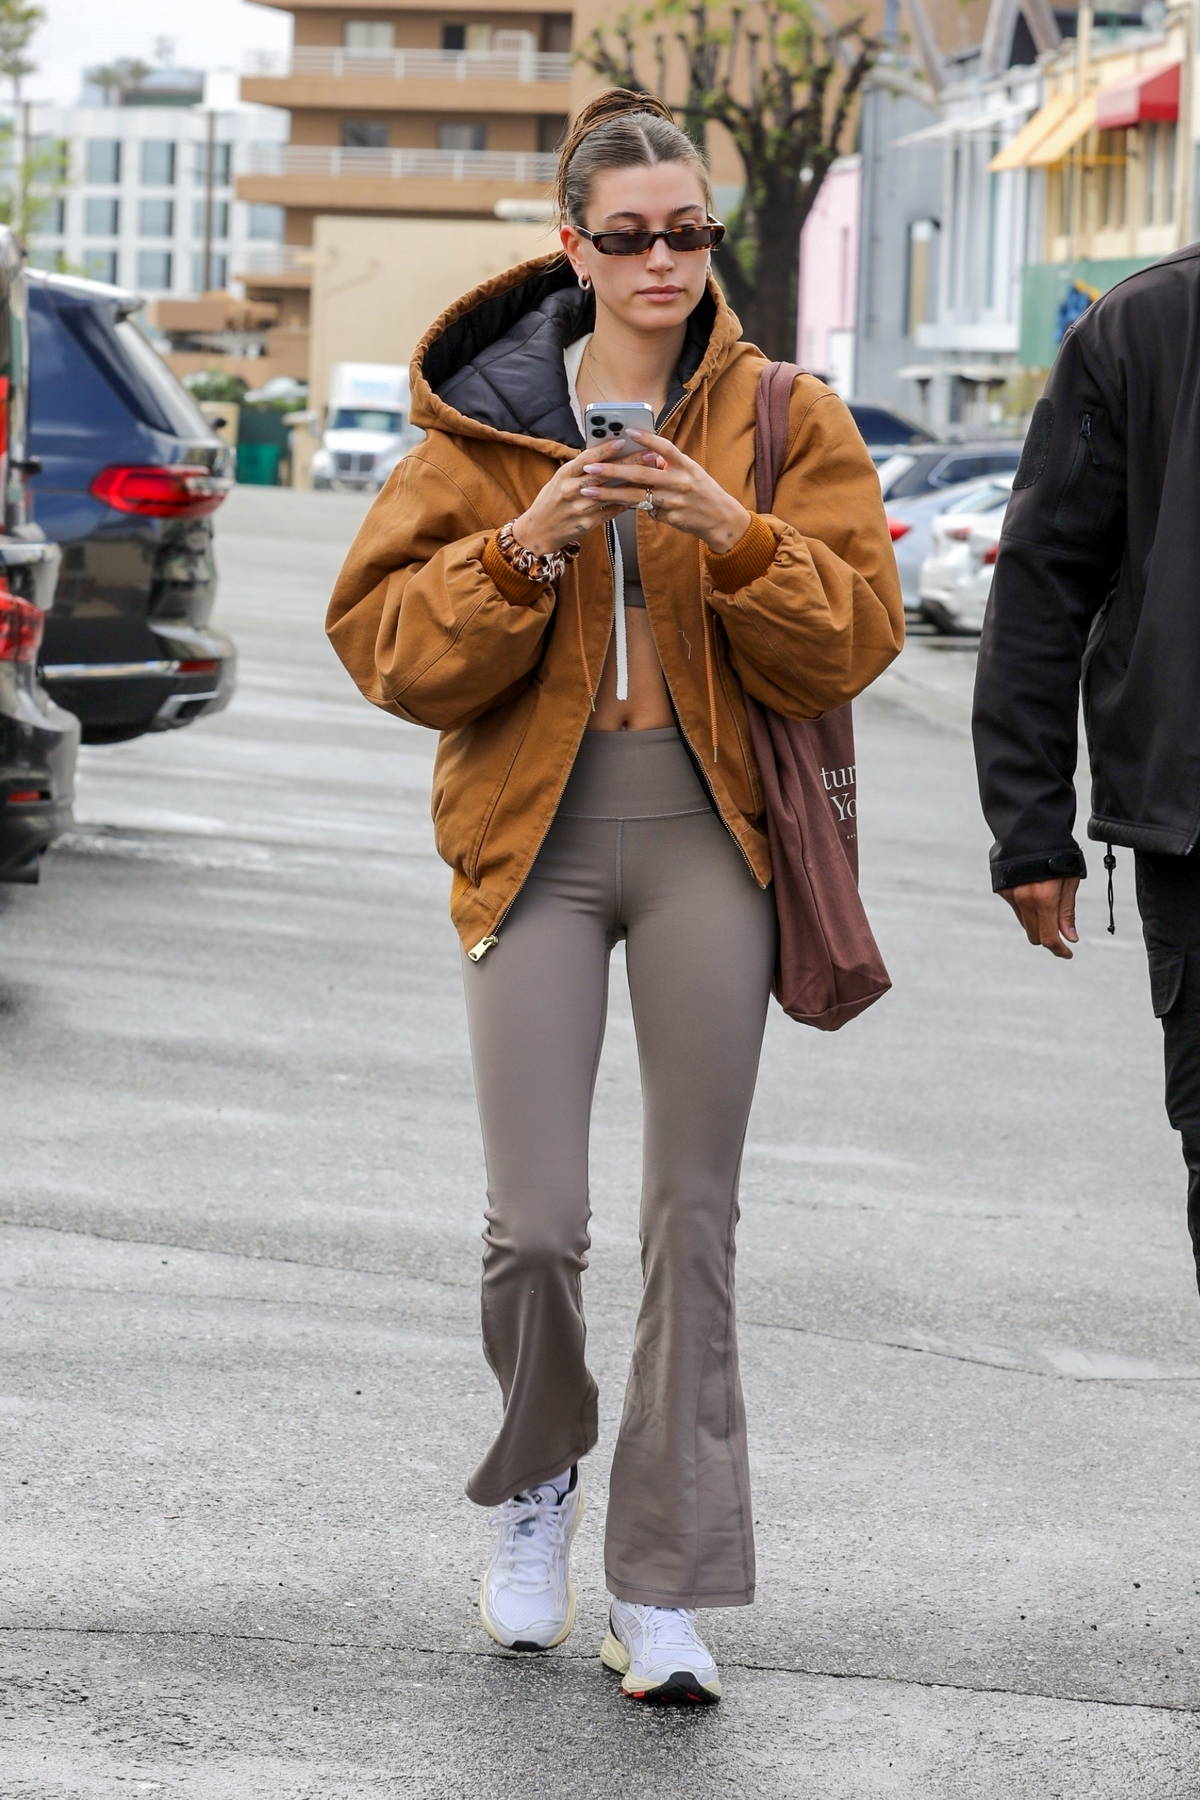 Hailey Bieber rocks a tan jacket and flared leggings for a hot